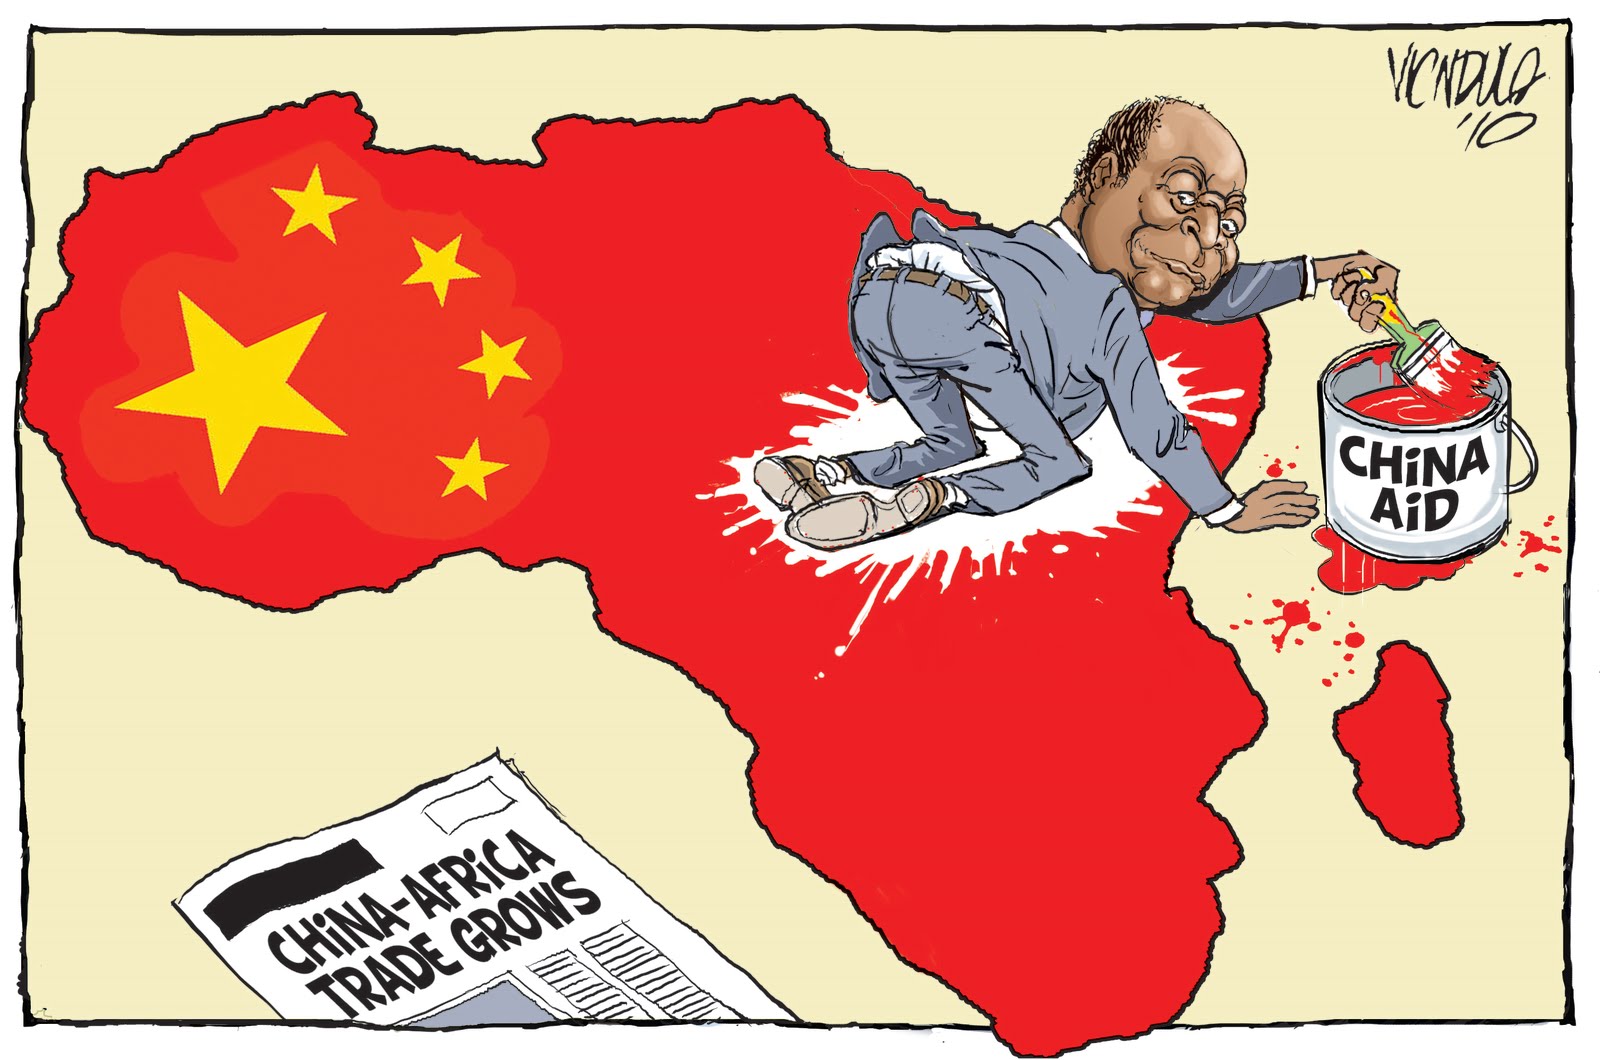 mami-s-shit-a-cfr-conversation-about-china-africa-and-the-nsa